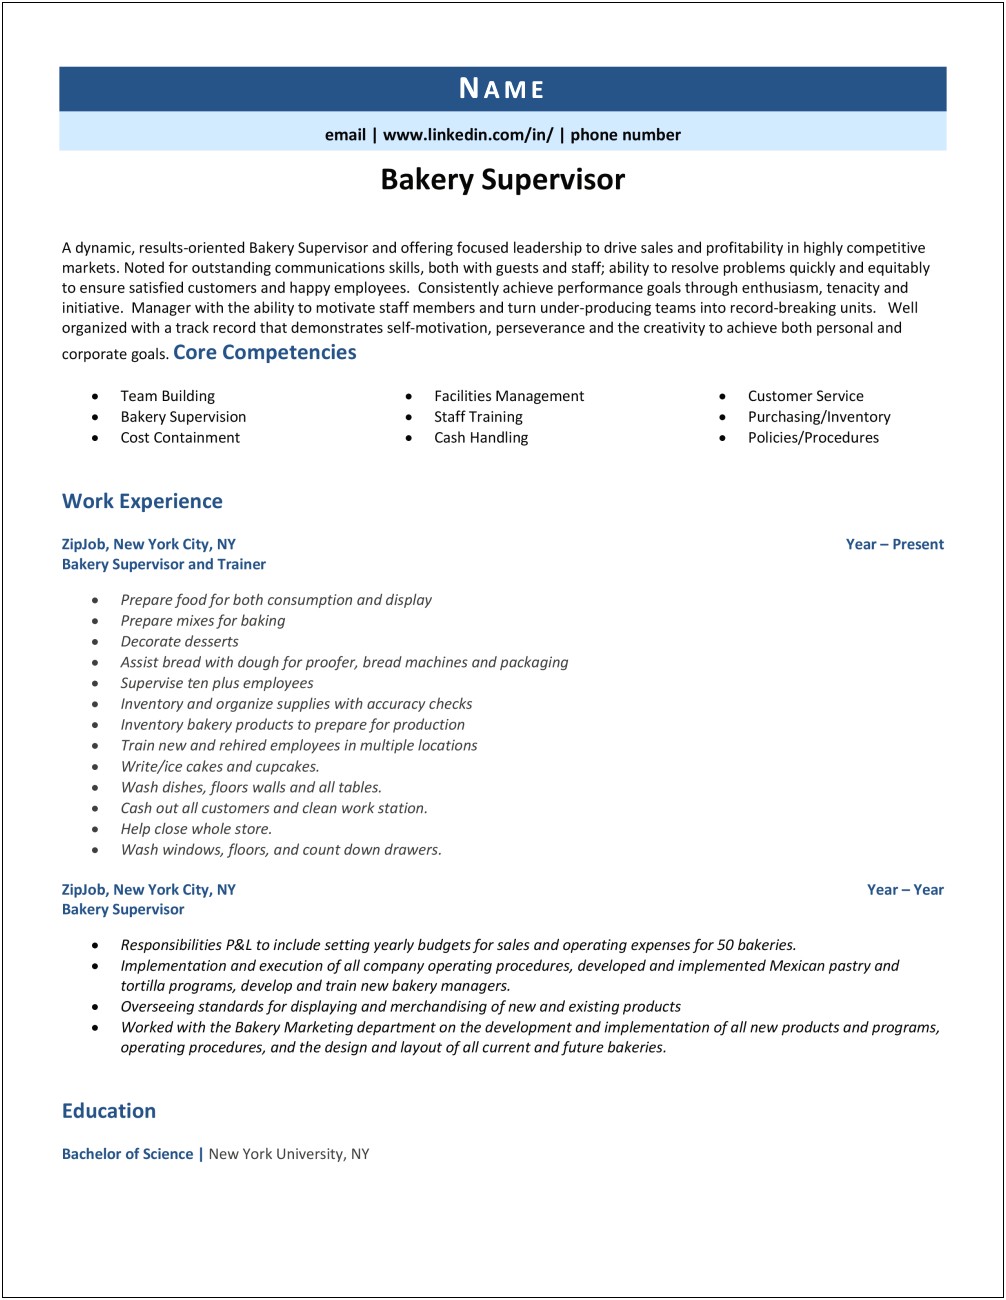 Resume For Working At A Bakery